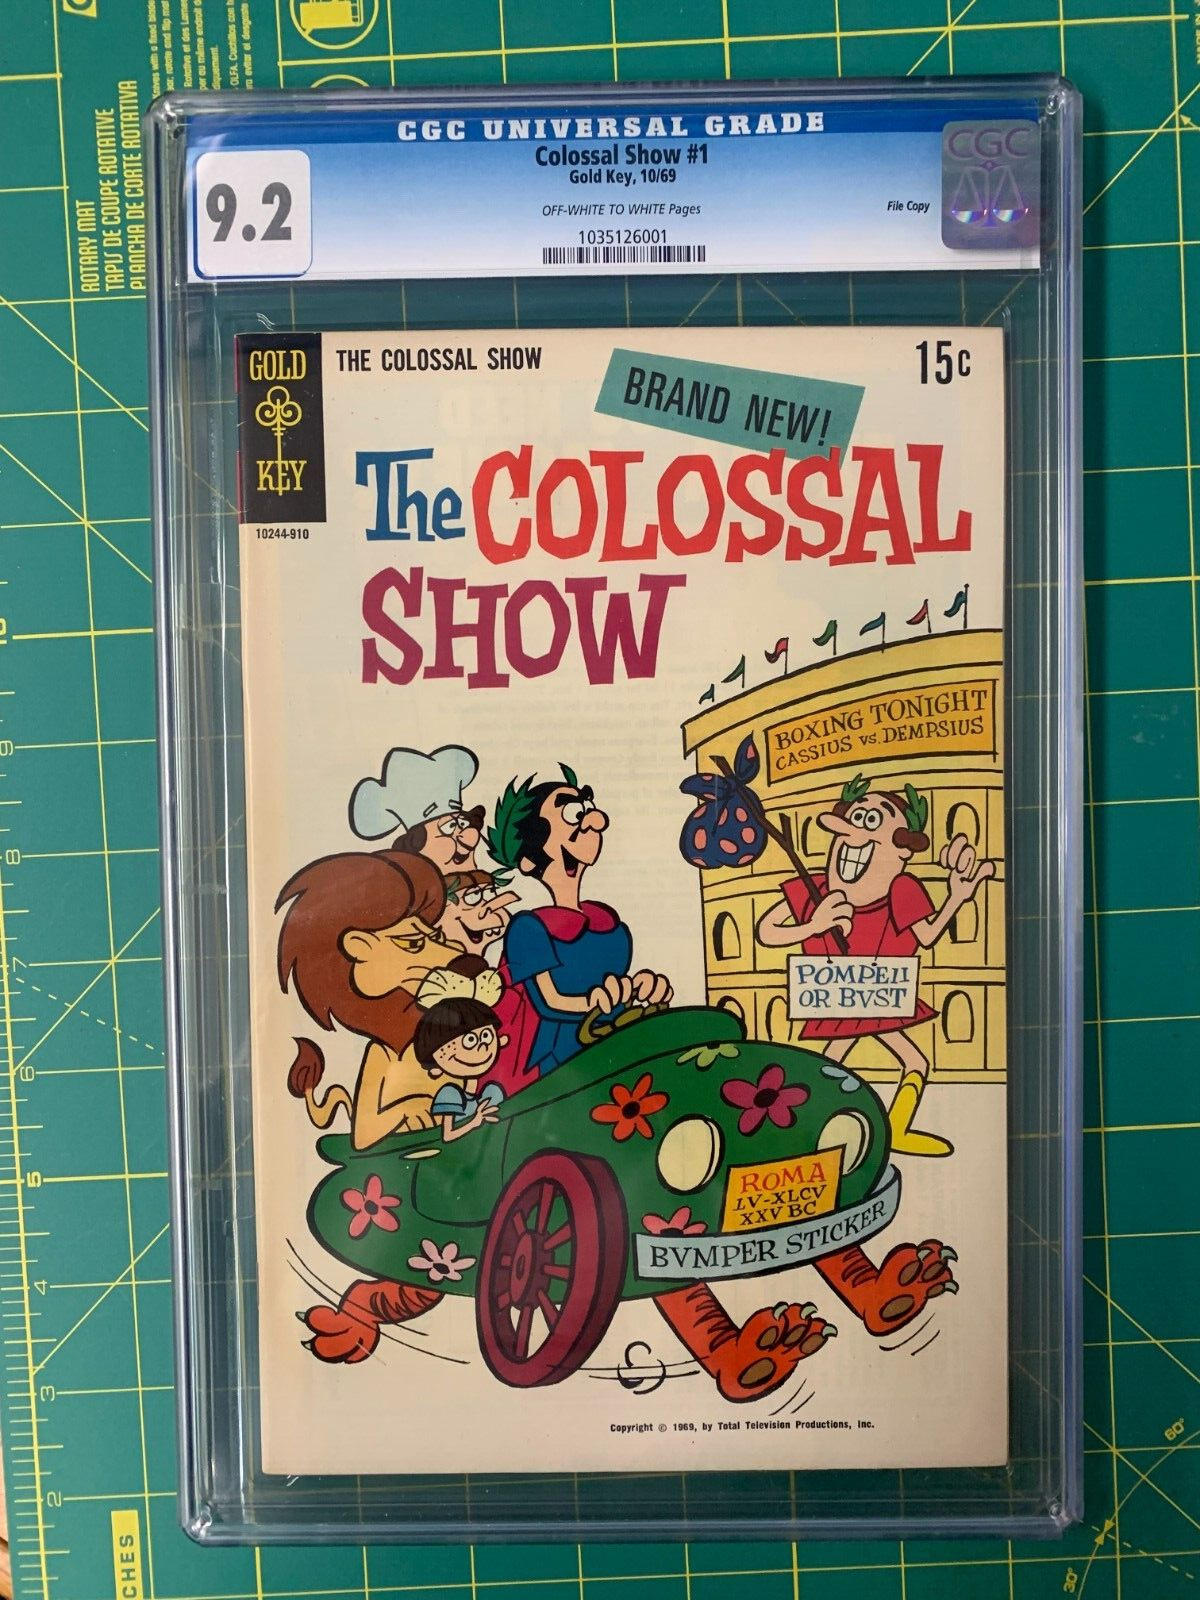 The Colossal Show #1 - Oct 1969 - Gold Key Comics - File Copy - CGC 9.2